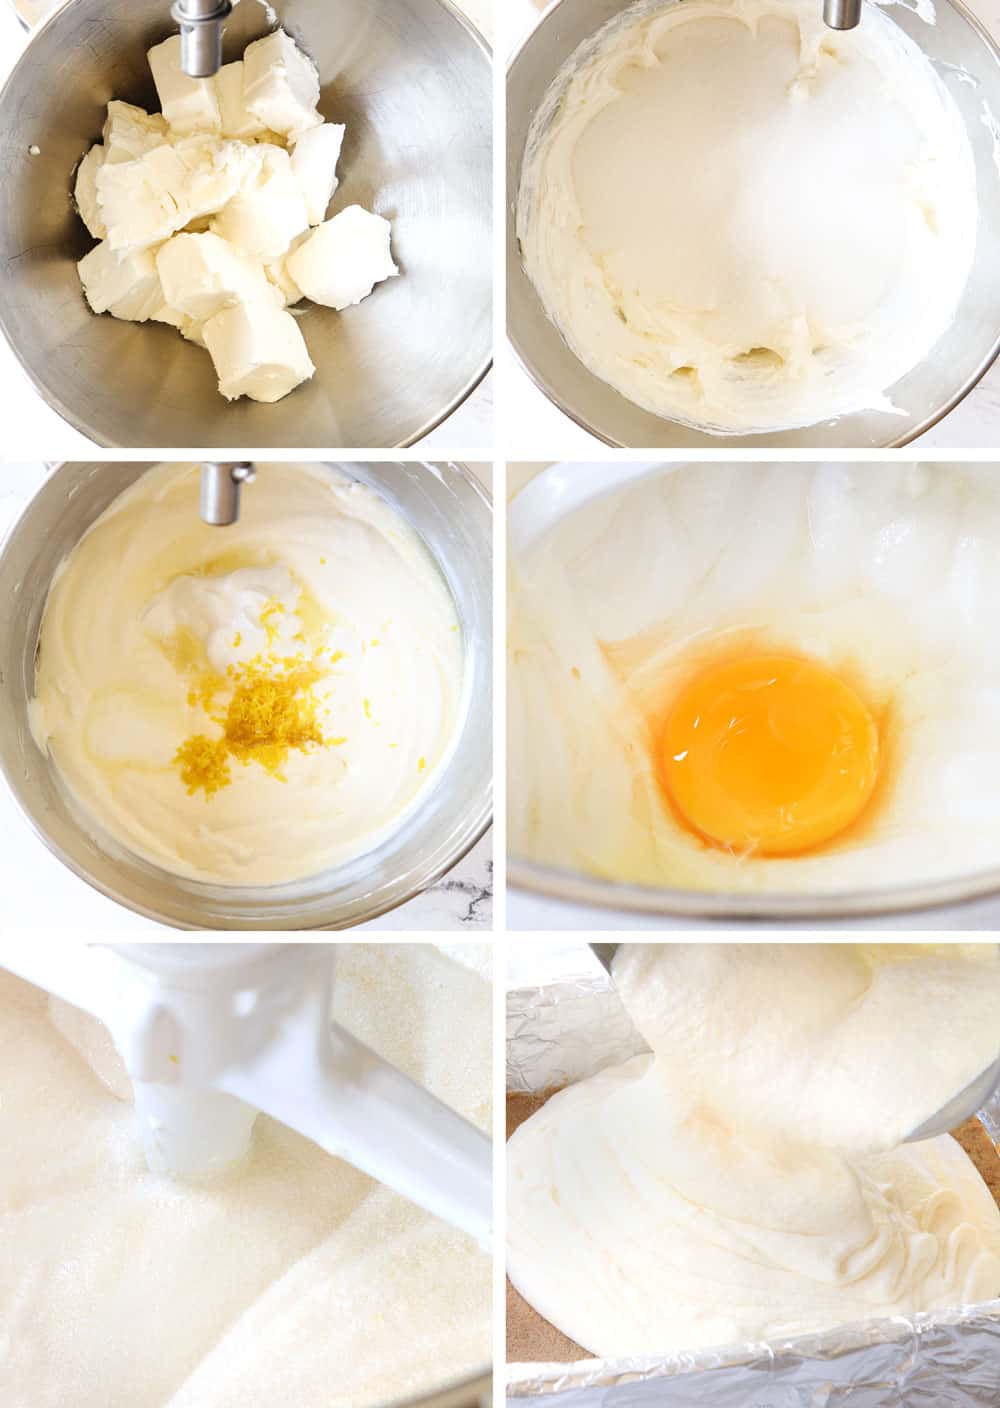 a collage showing how to make lemon cheesecake bars by 1) beating cream cheese in an electric mixer, 2) adding sugar, 3) adding eggs, 4) beating until smoot, 5) pouring cheesecake on crust